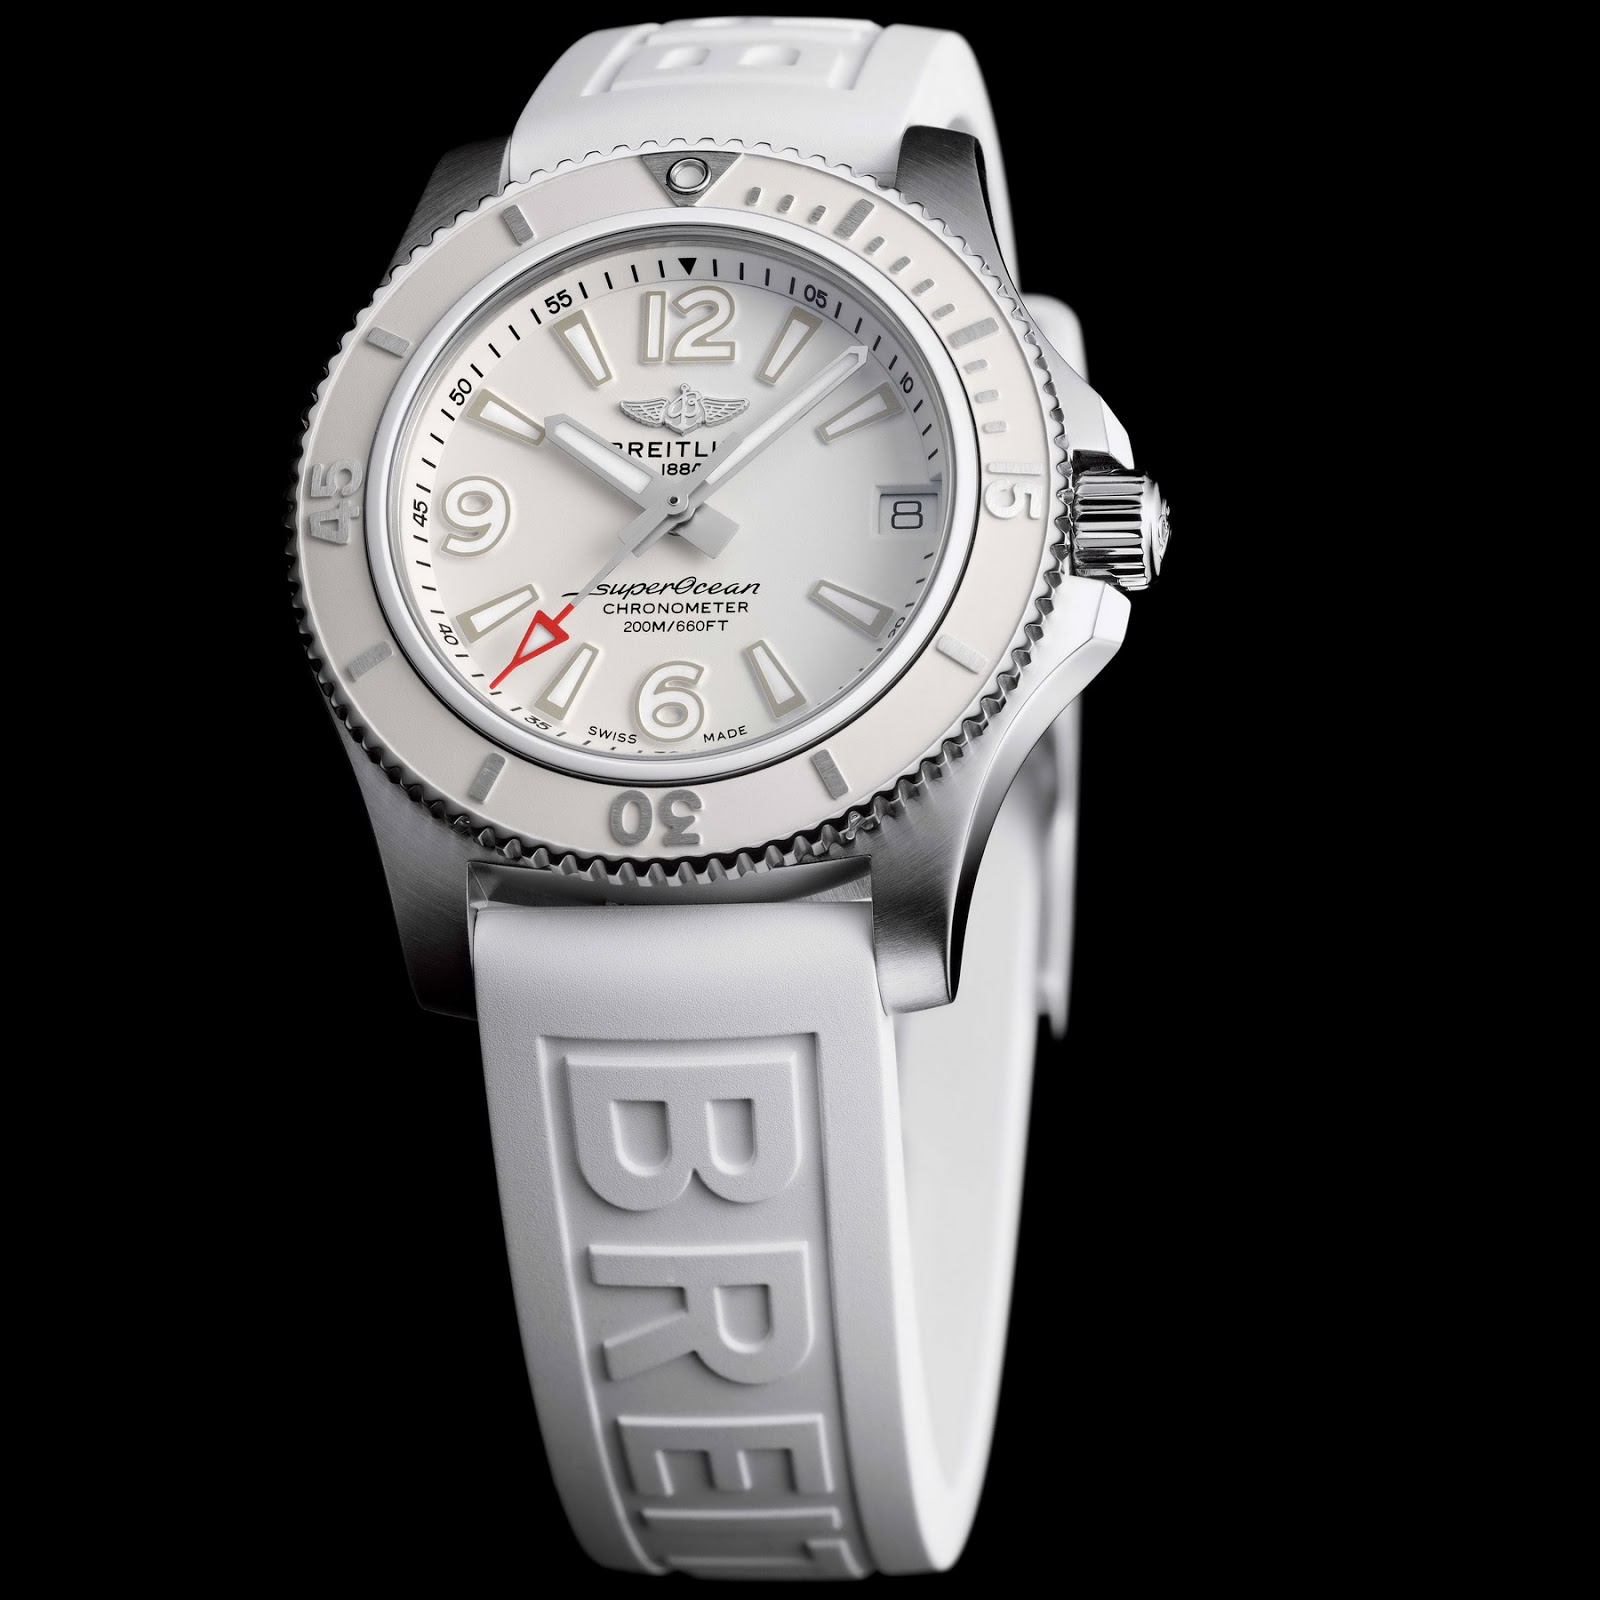 Breitling's newest from Baselworld 2019 BREITLING%2BSuperocean%2B36%2B01